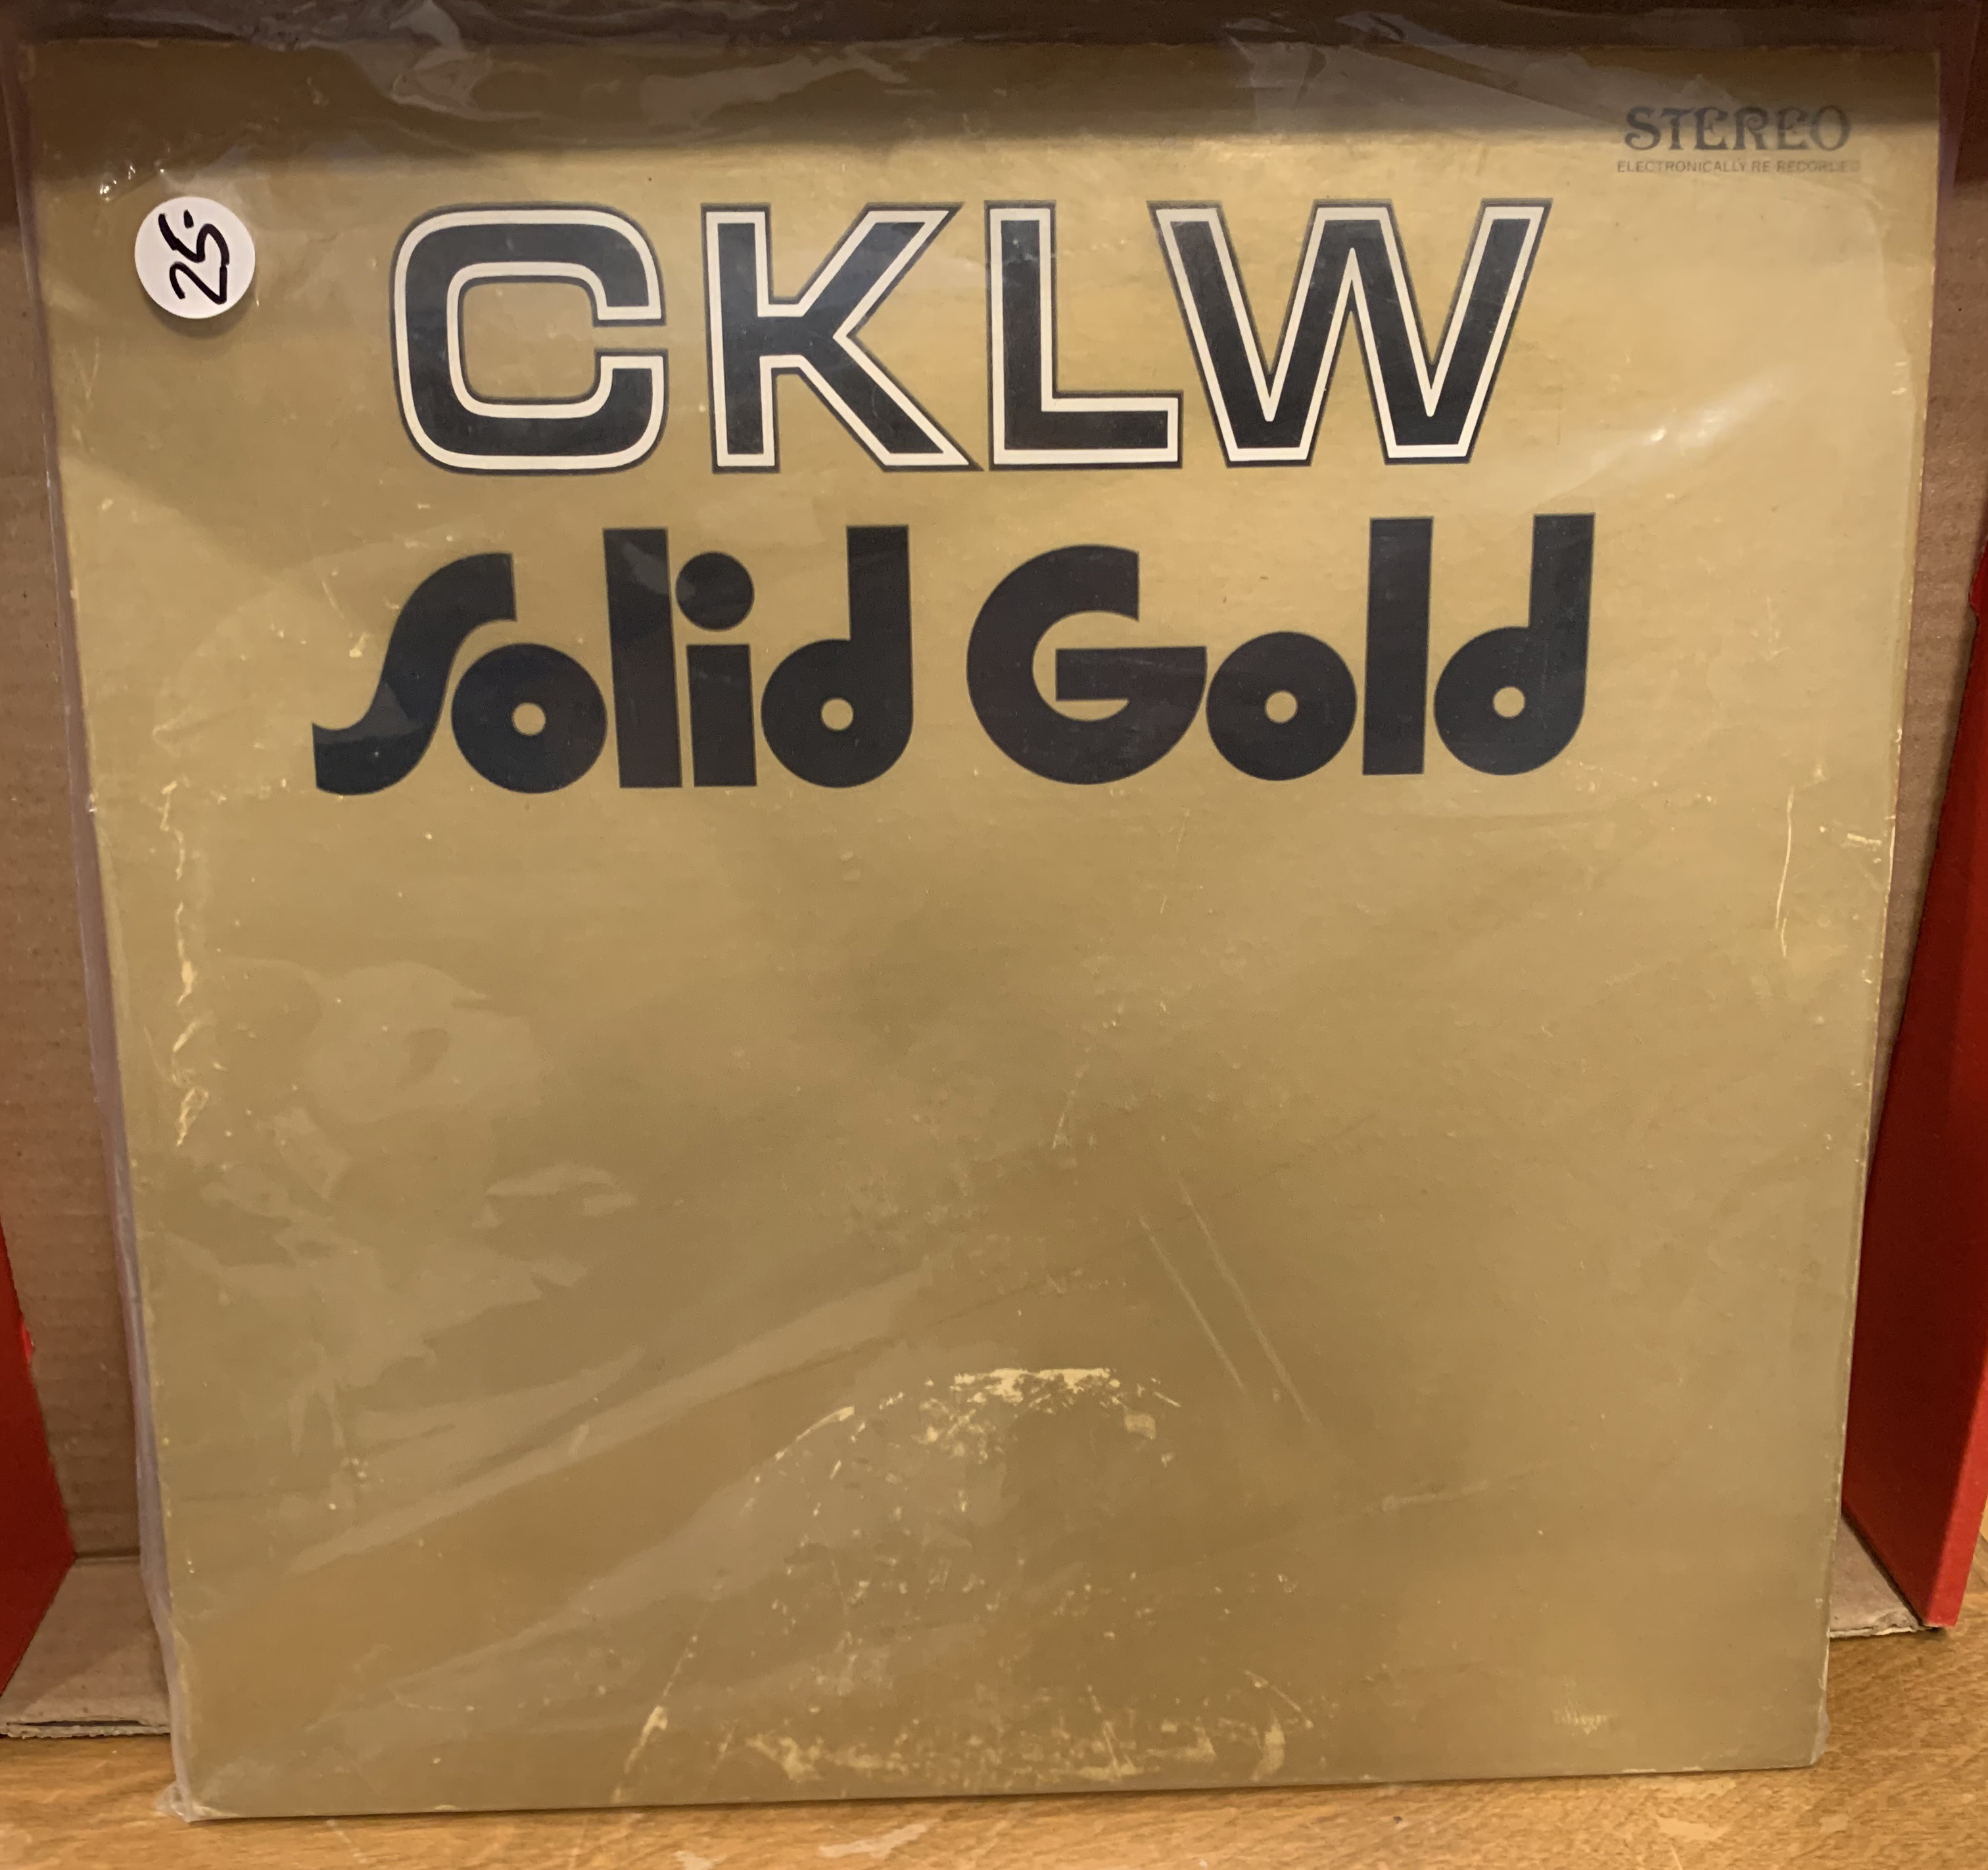 colour%20photo%20showing%20CKLW%20Solid%20Gold%20vinyl%20record